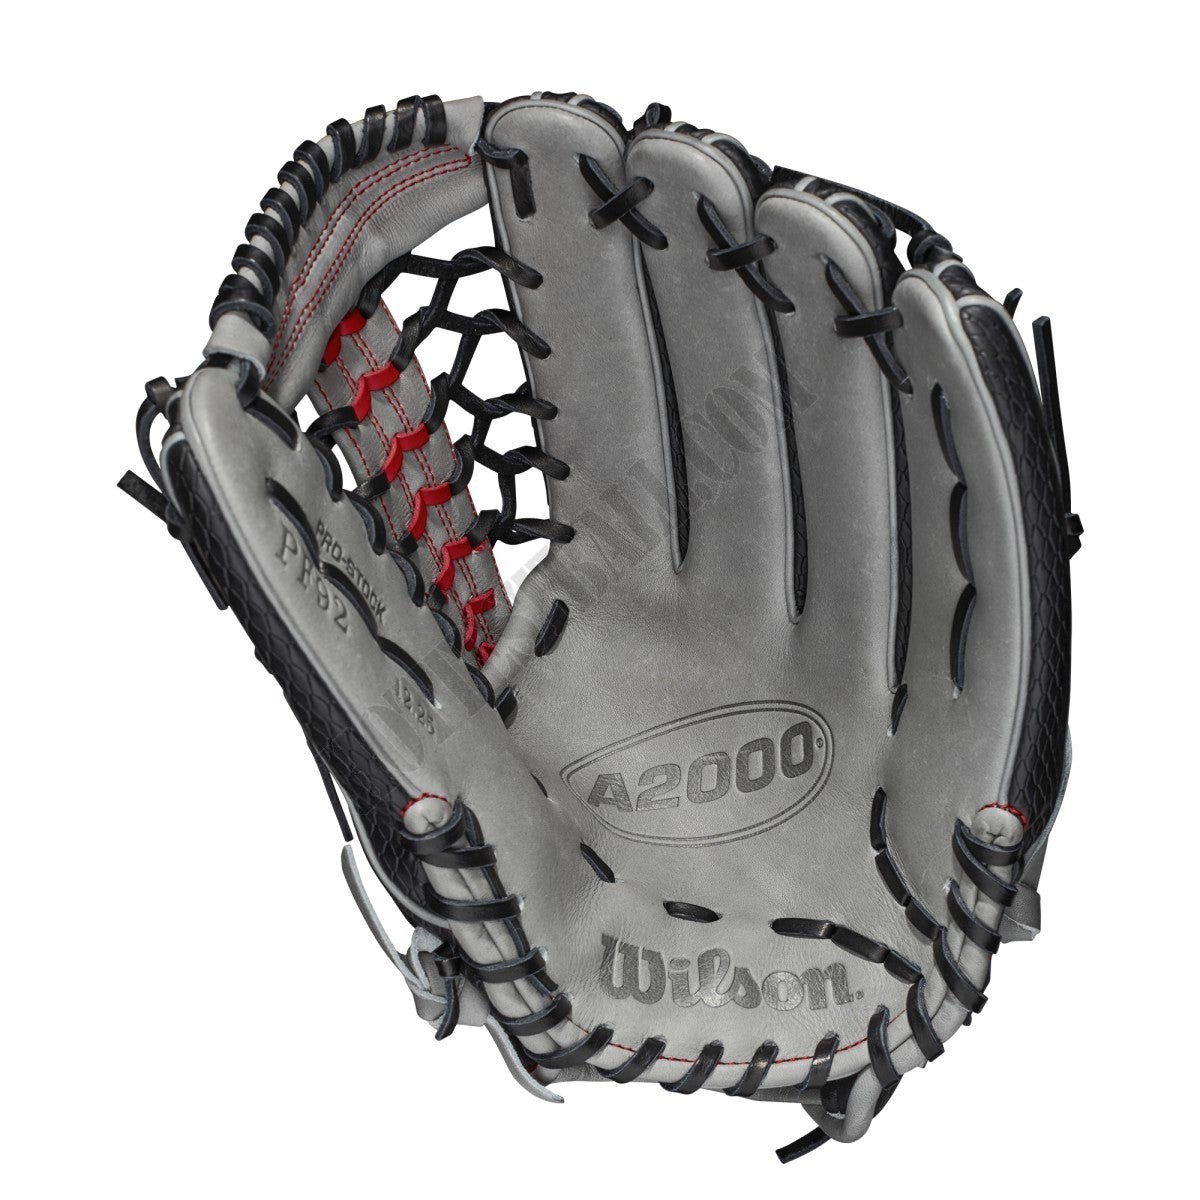 2021 A2000 PF92SS 12.25" Pedroia Fit Outfield Baseball Glove ● Wilson Promotions - -2